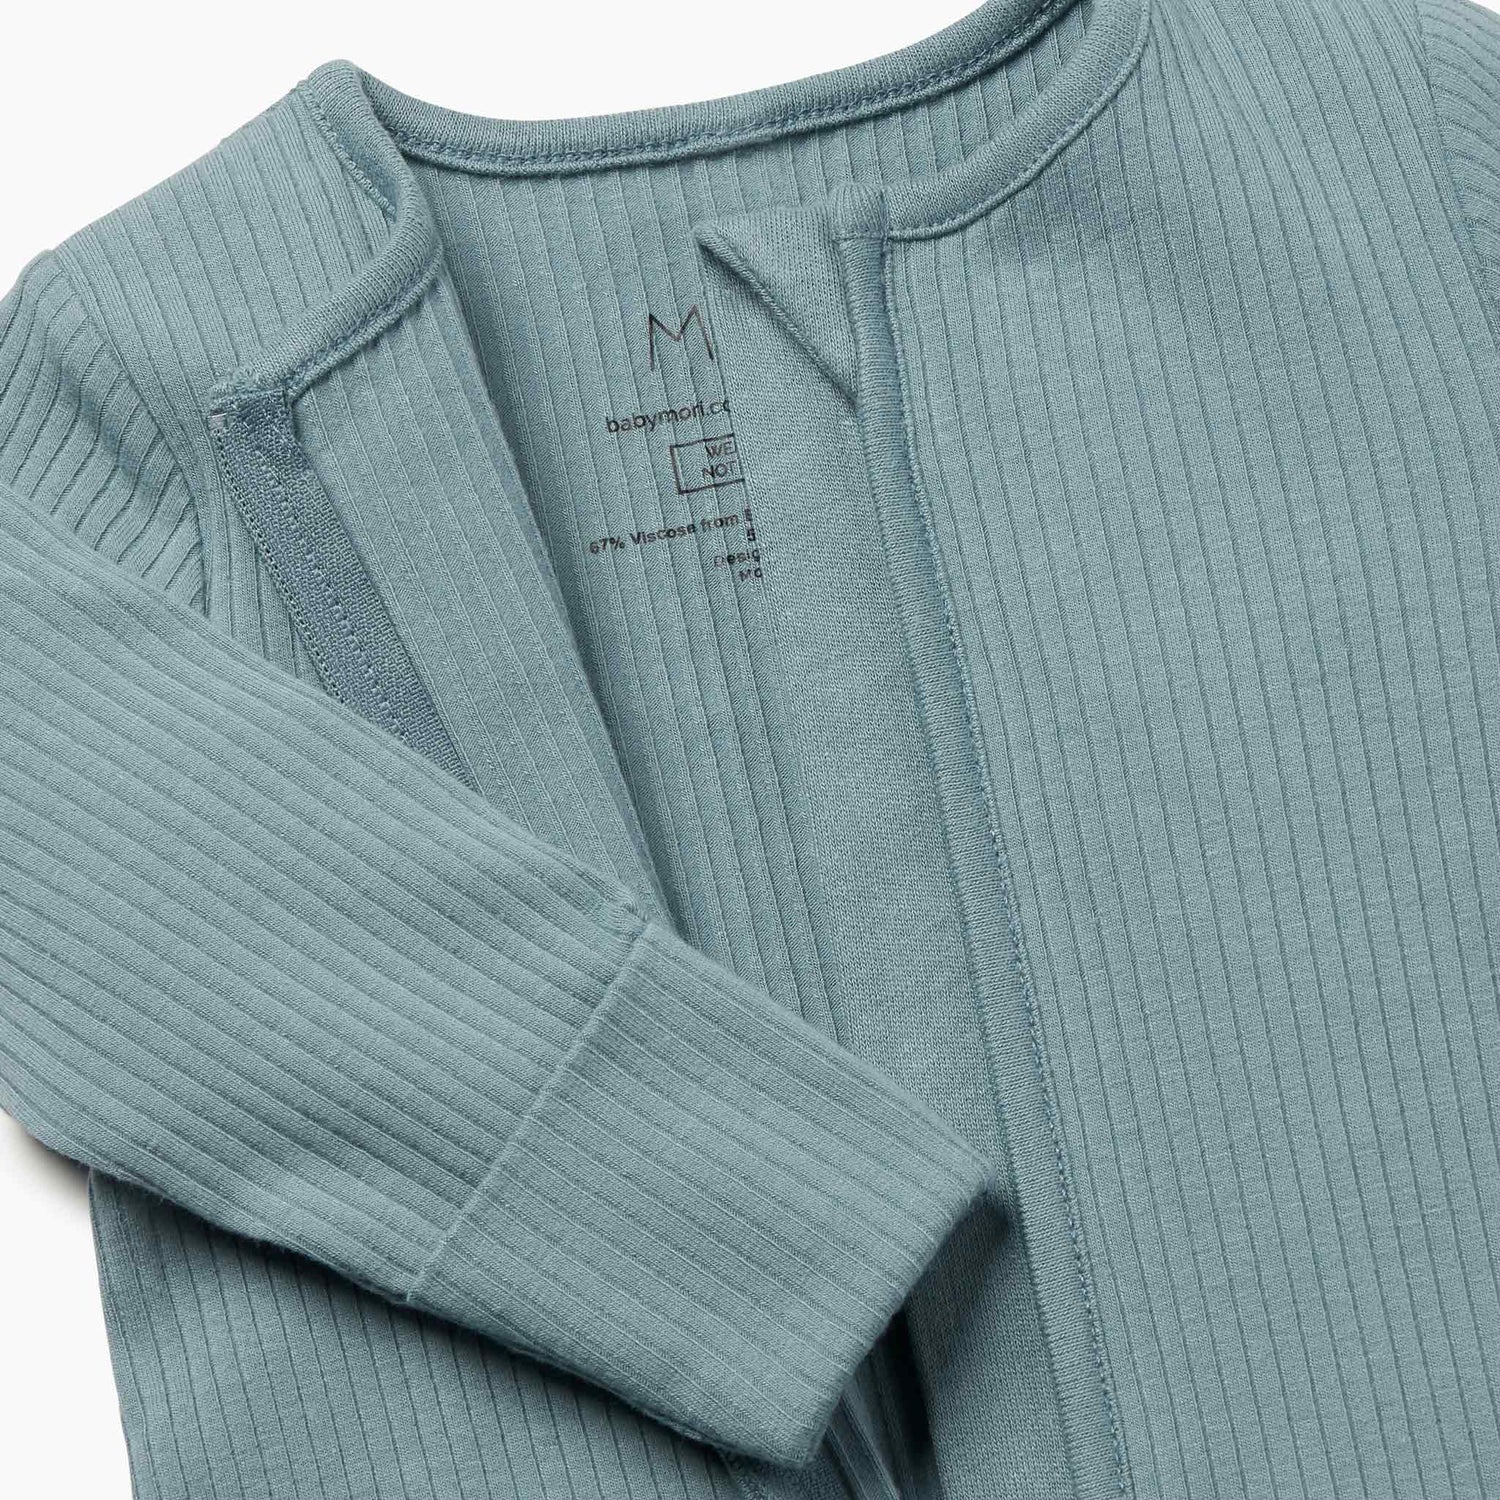 Sky ribbed zip up sleepsuit close up